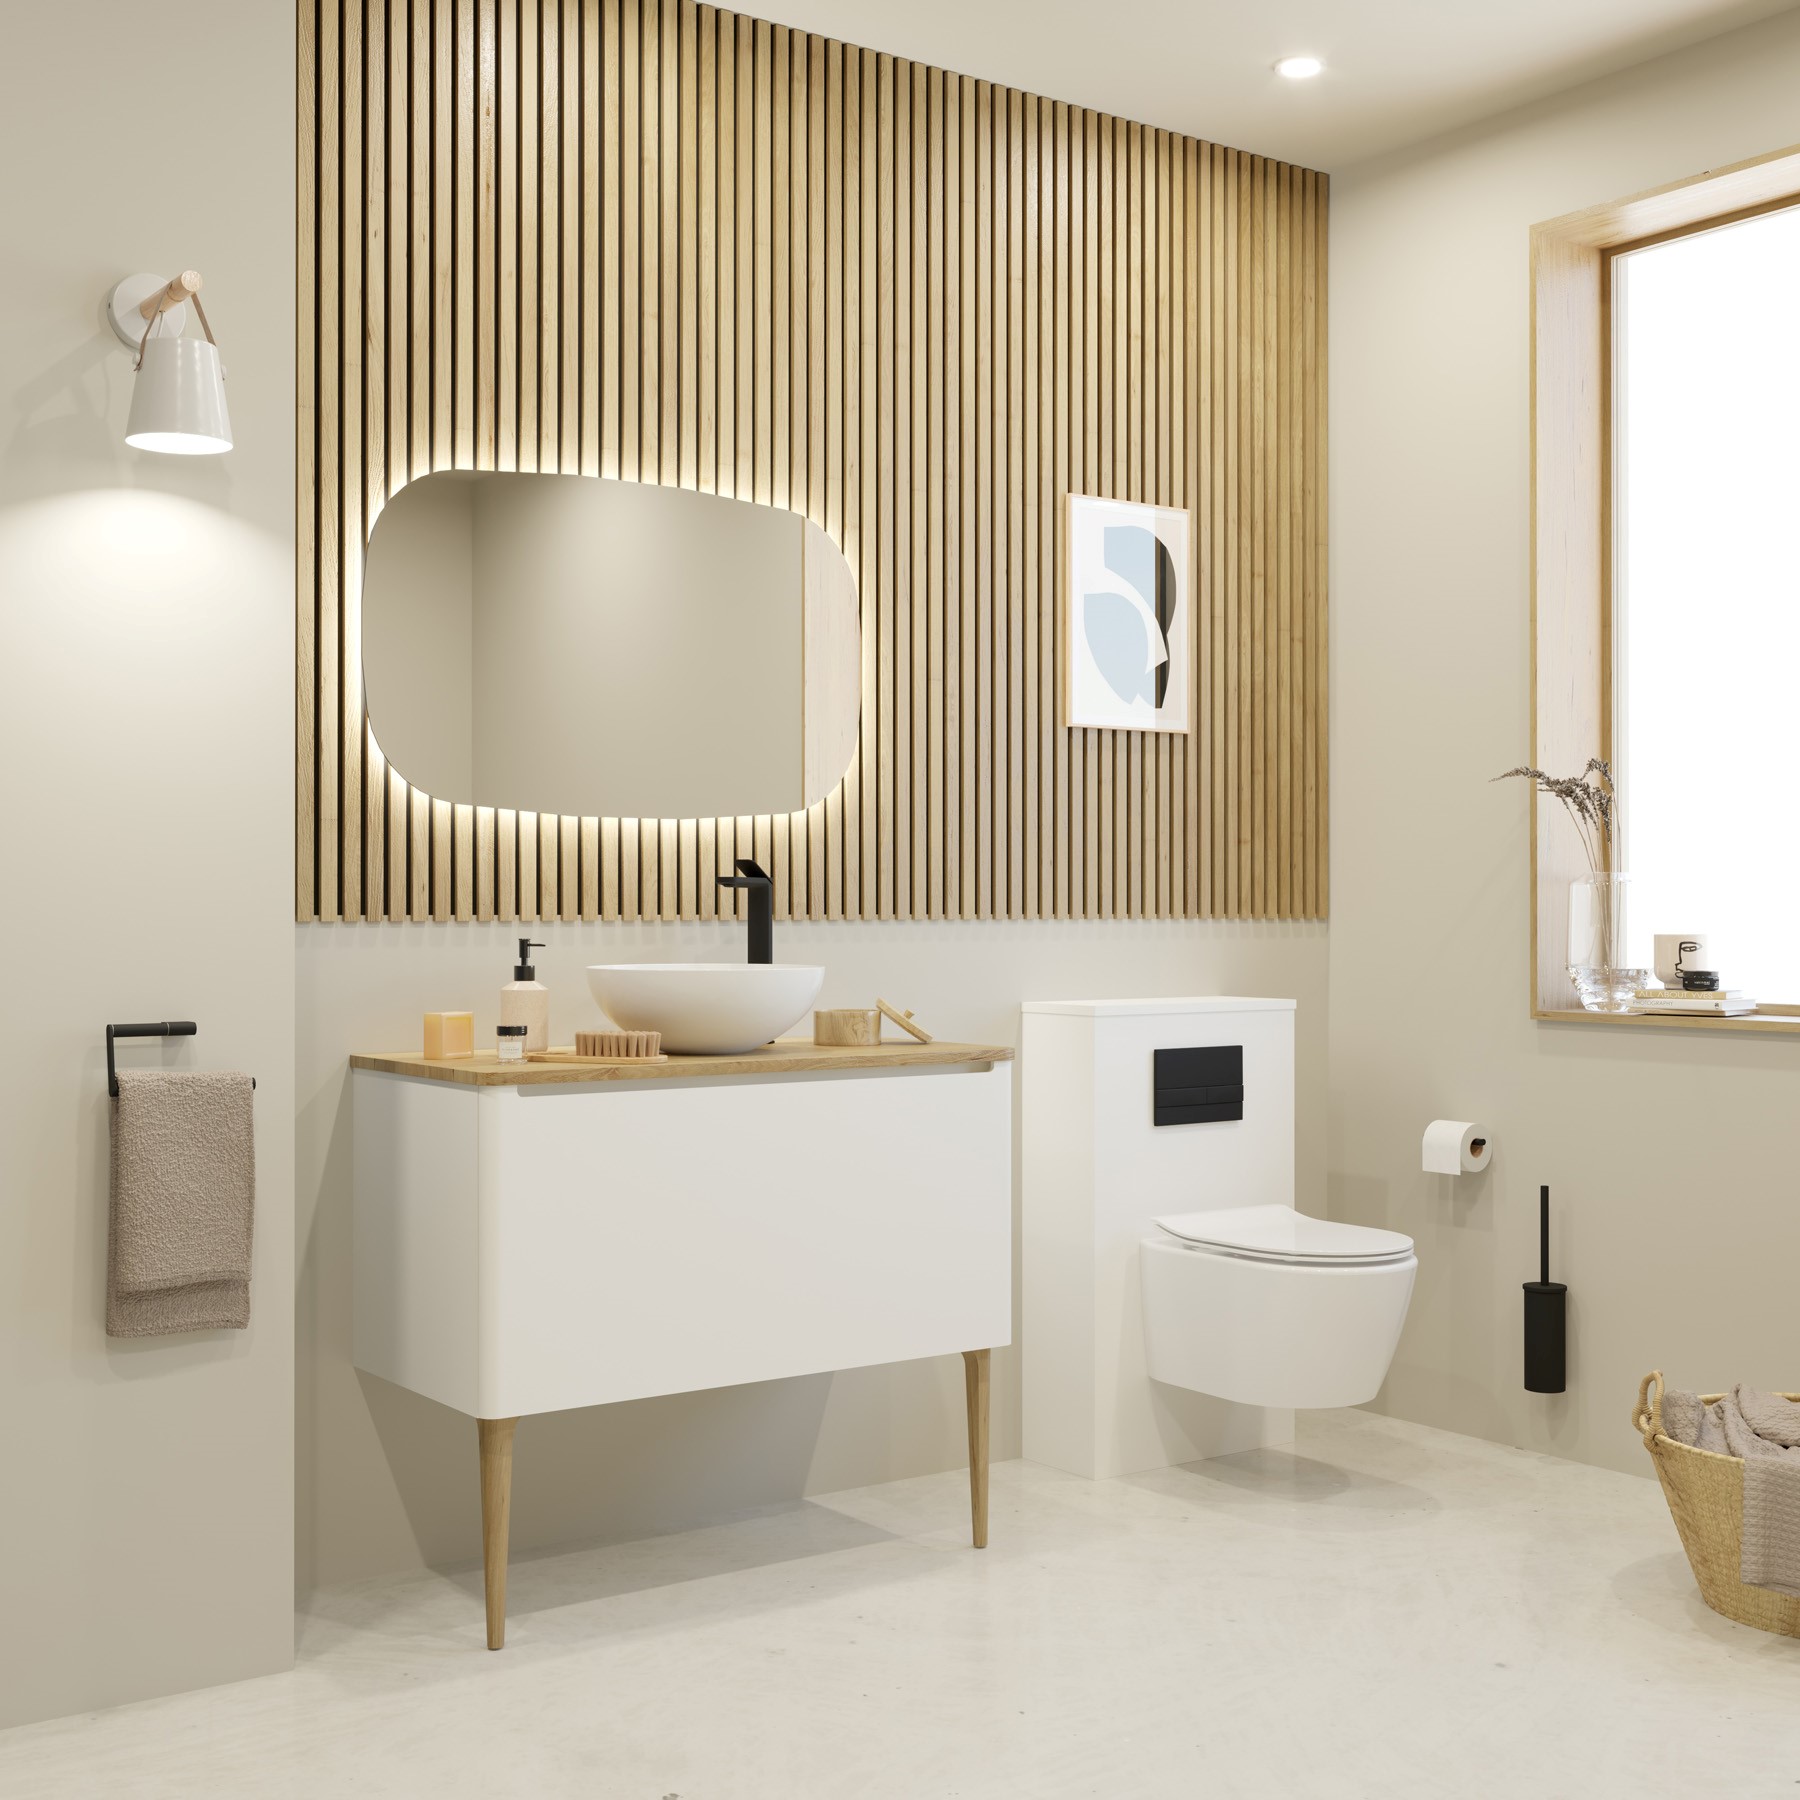 Bathroom renovation | Bring your bathroom remodel idea to your home by visiting your local retailer